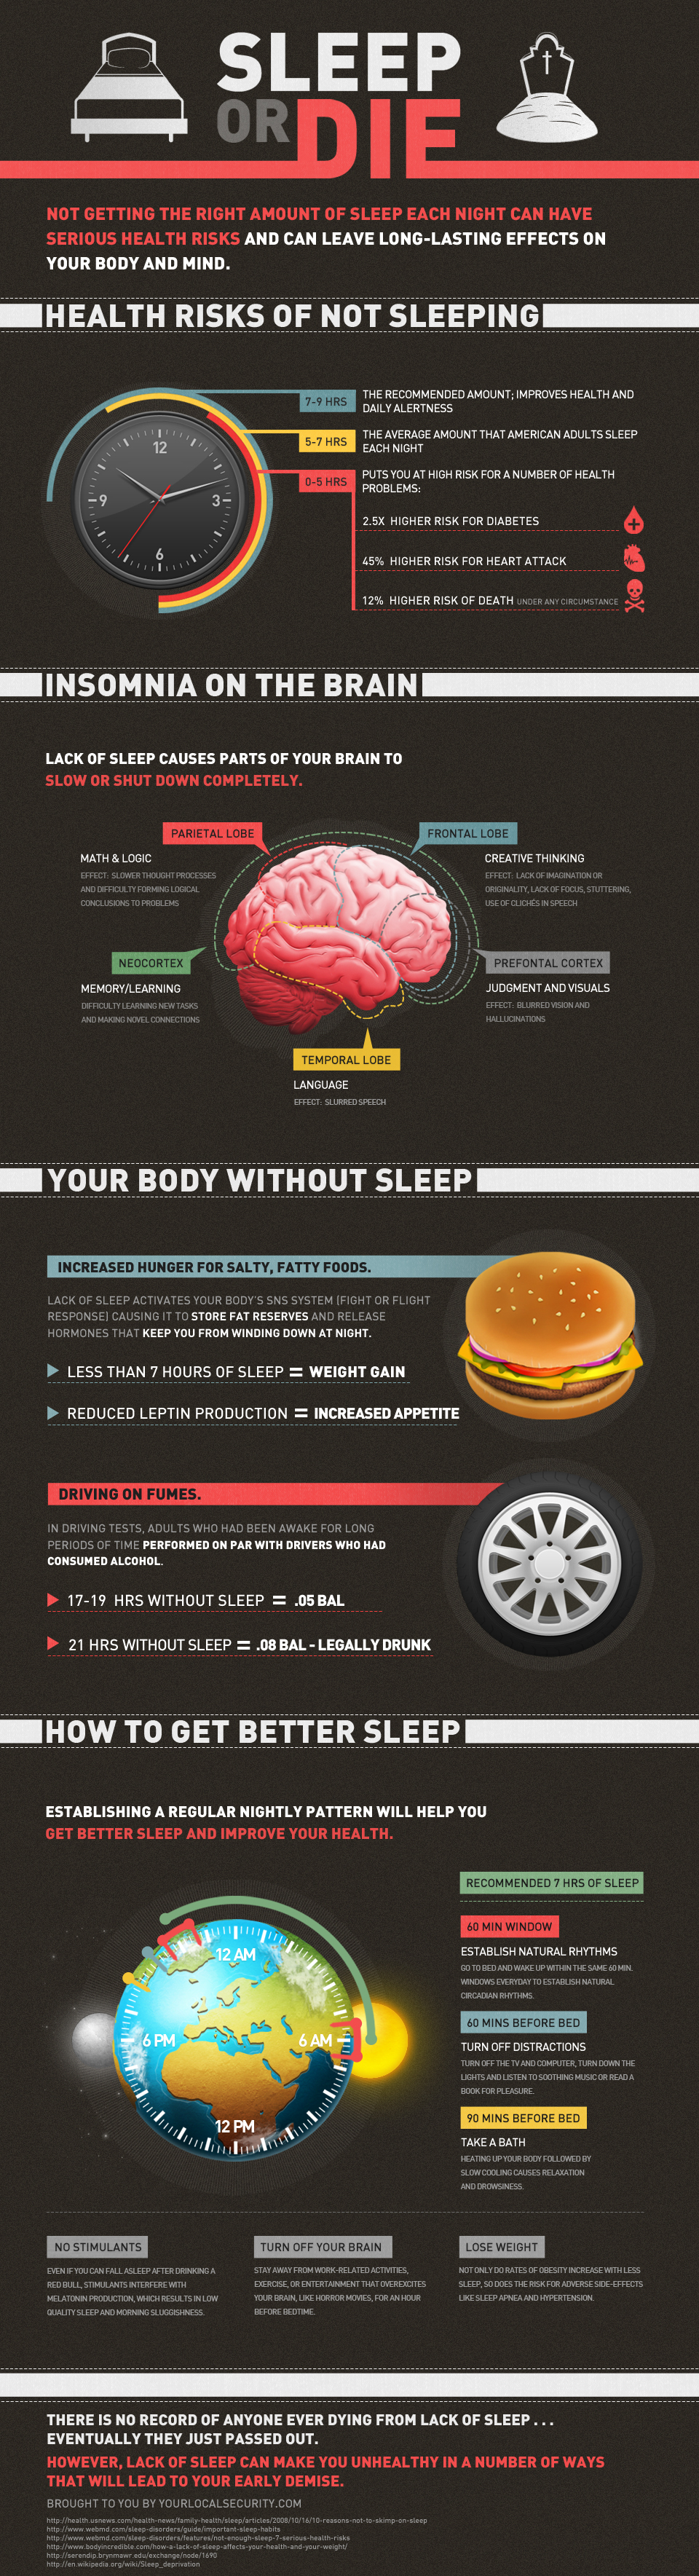 Infographic displaying the effects of missing sleep